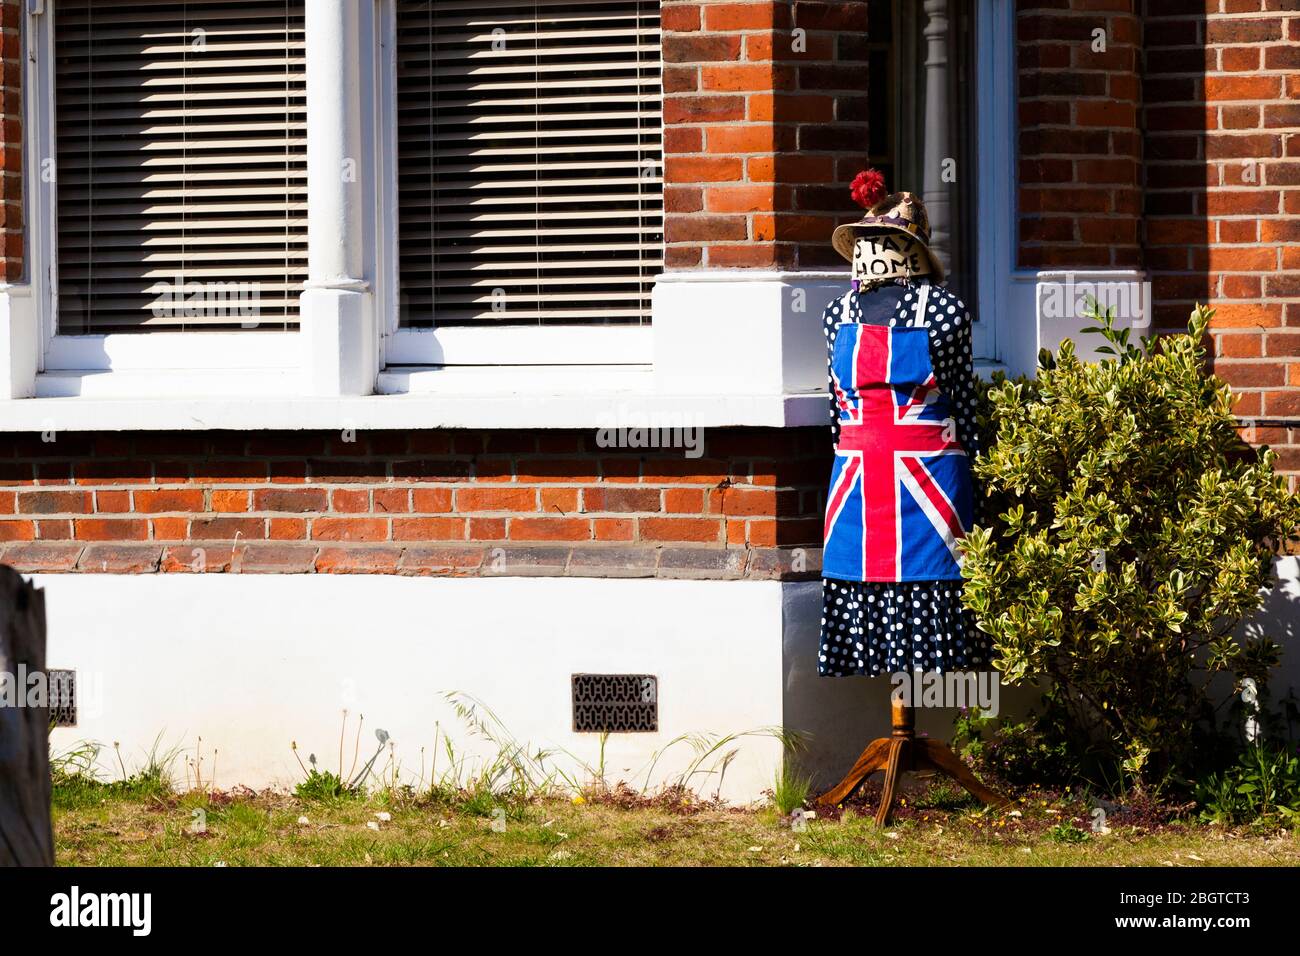 Union Jack apron on a 'Stay at Home' covid-19 message, London, UK Stock Photo